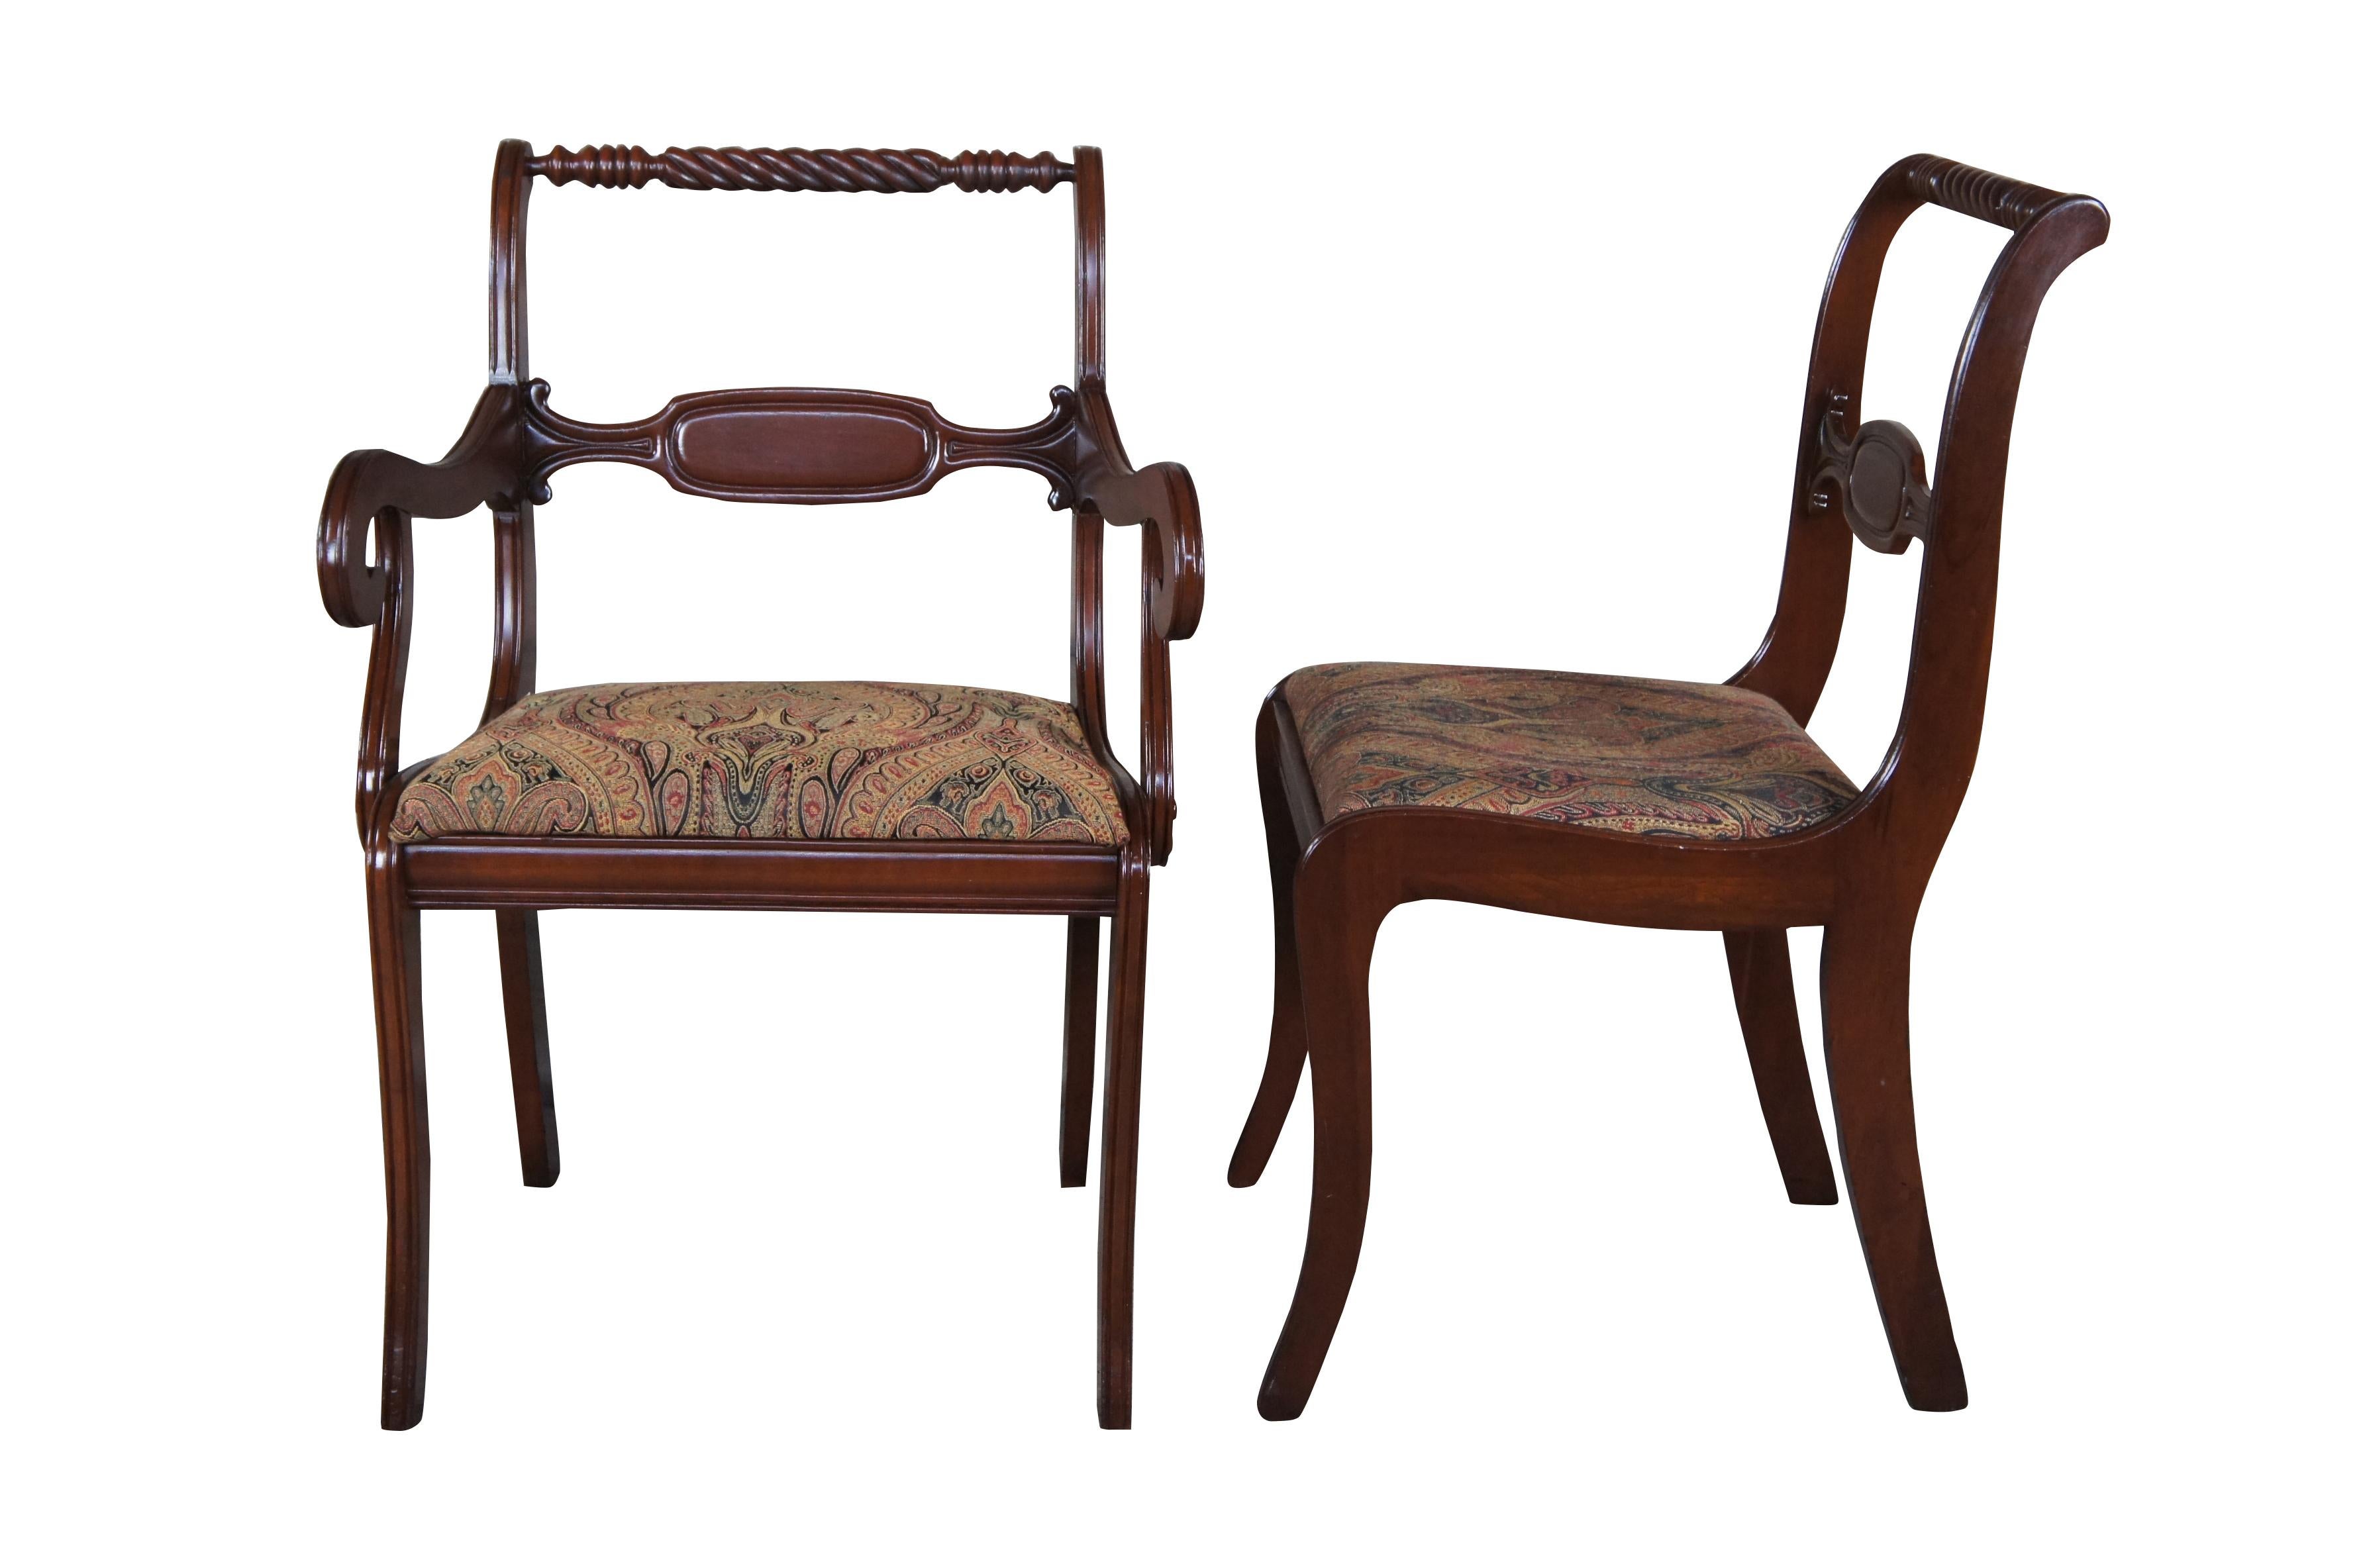 Set of six Antique Styled by Park dining chairs.  Made of cherry featuring an open back design with barley twisted and fluted accents and paisley seat.

Styled by Park is the hallmark of The Park Furniture Company of Rushville Indiana. The Park